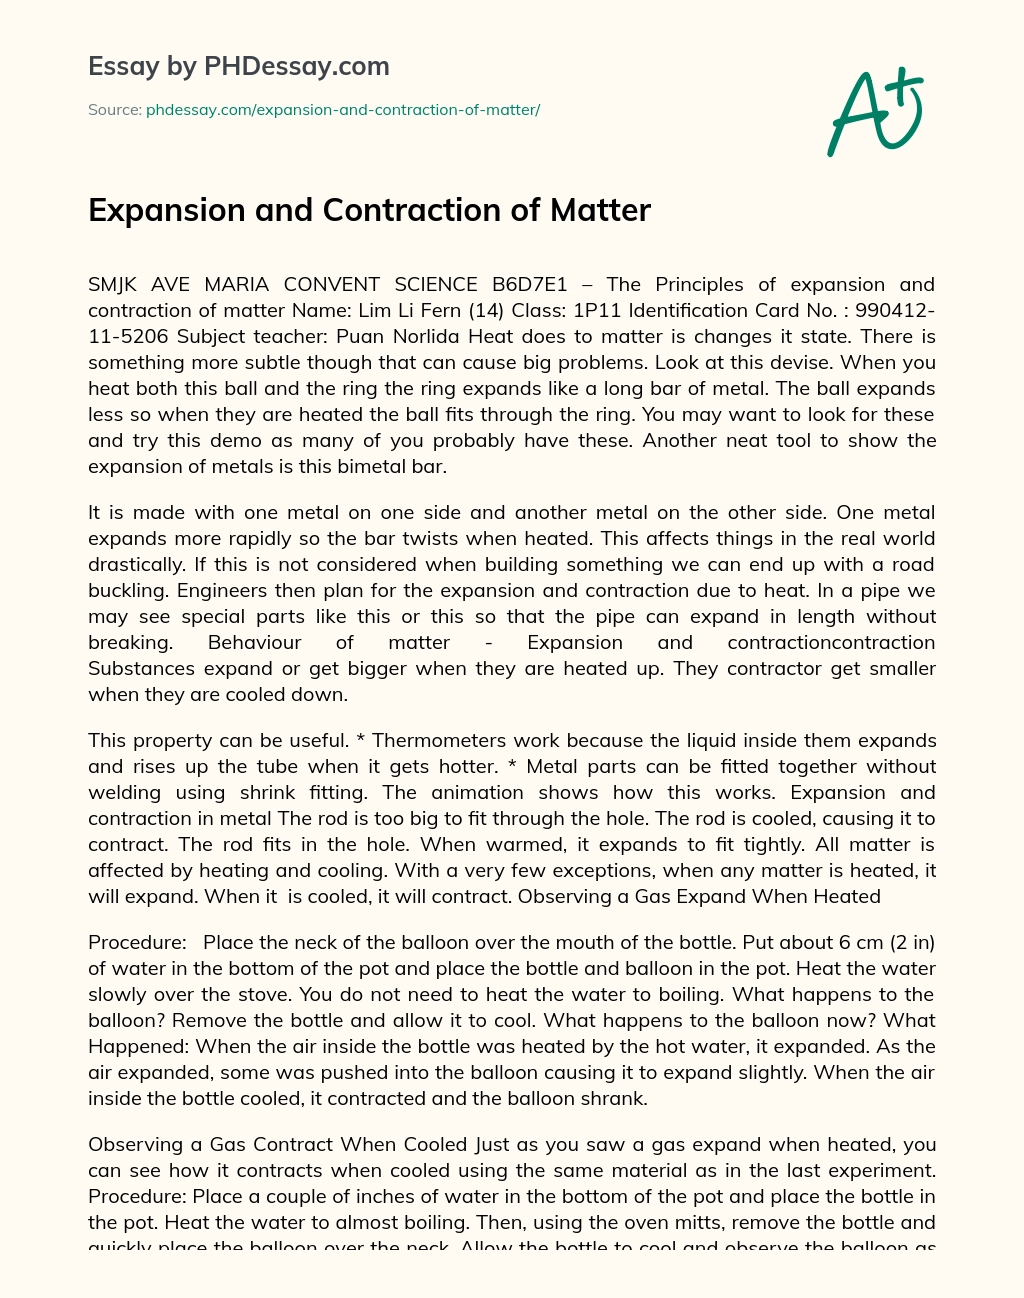 Expansion and Contraction of Matter essay